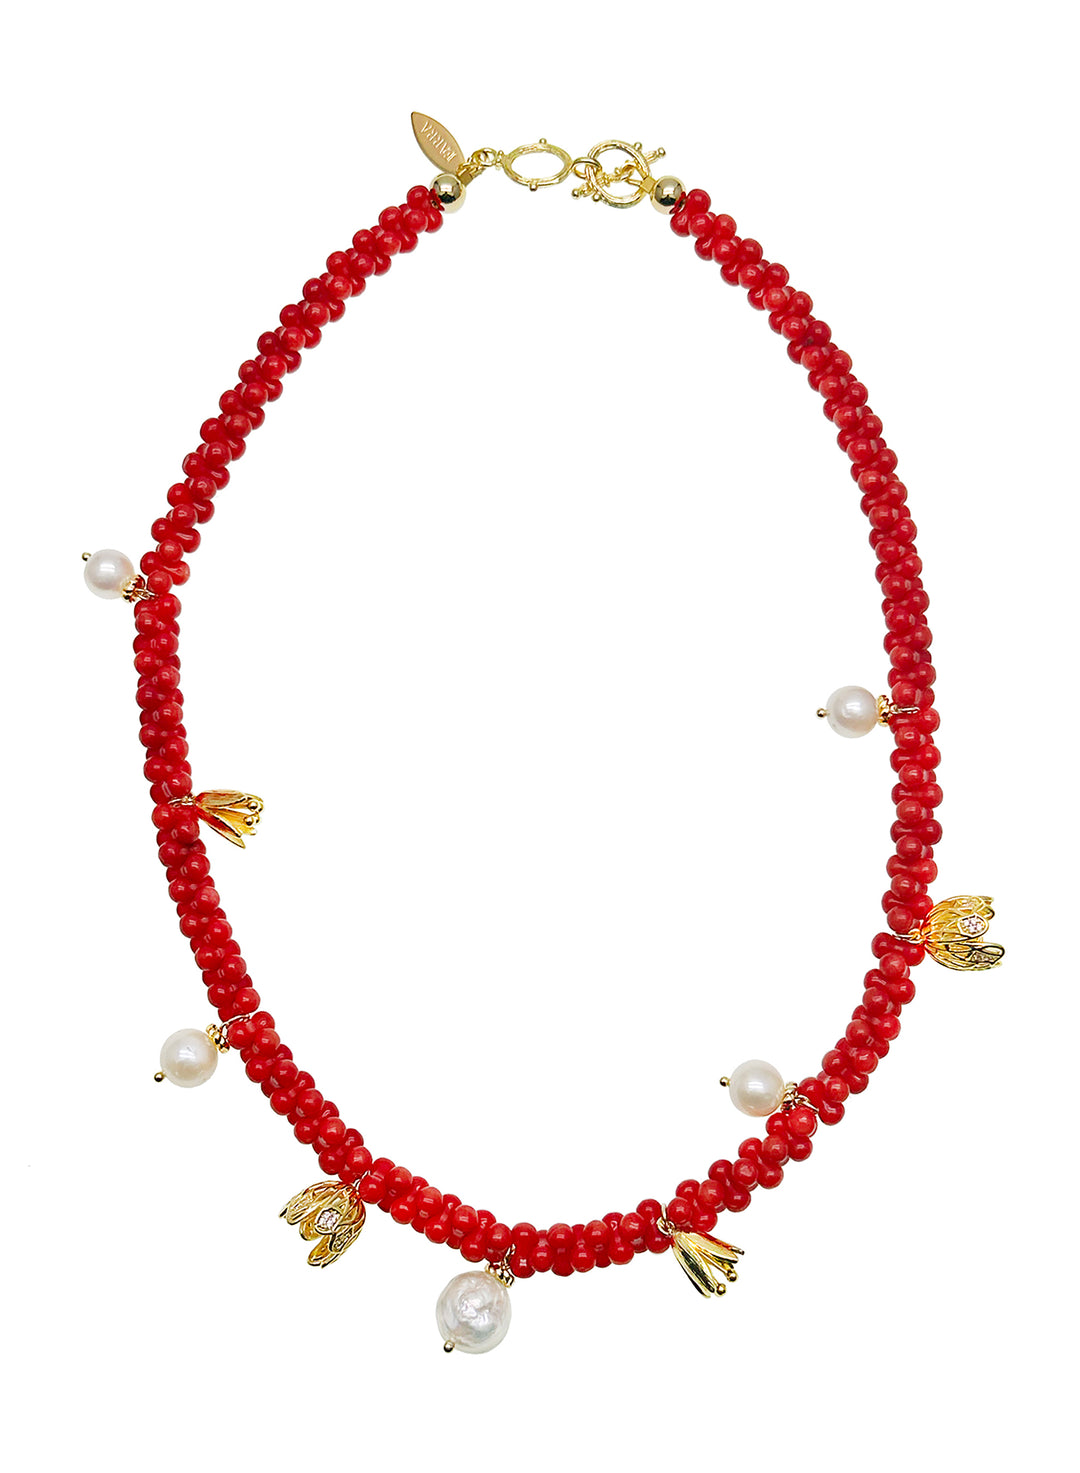 Peanut Shaped Red Coral Necklace JN001 - FARRA